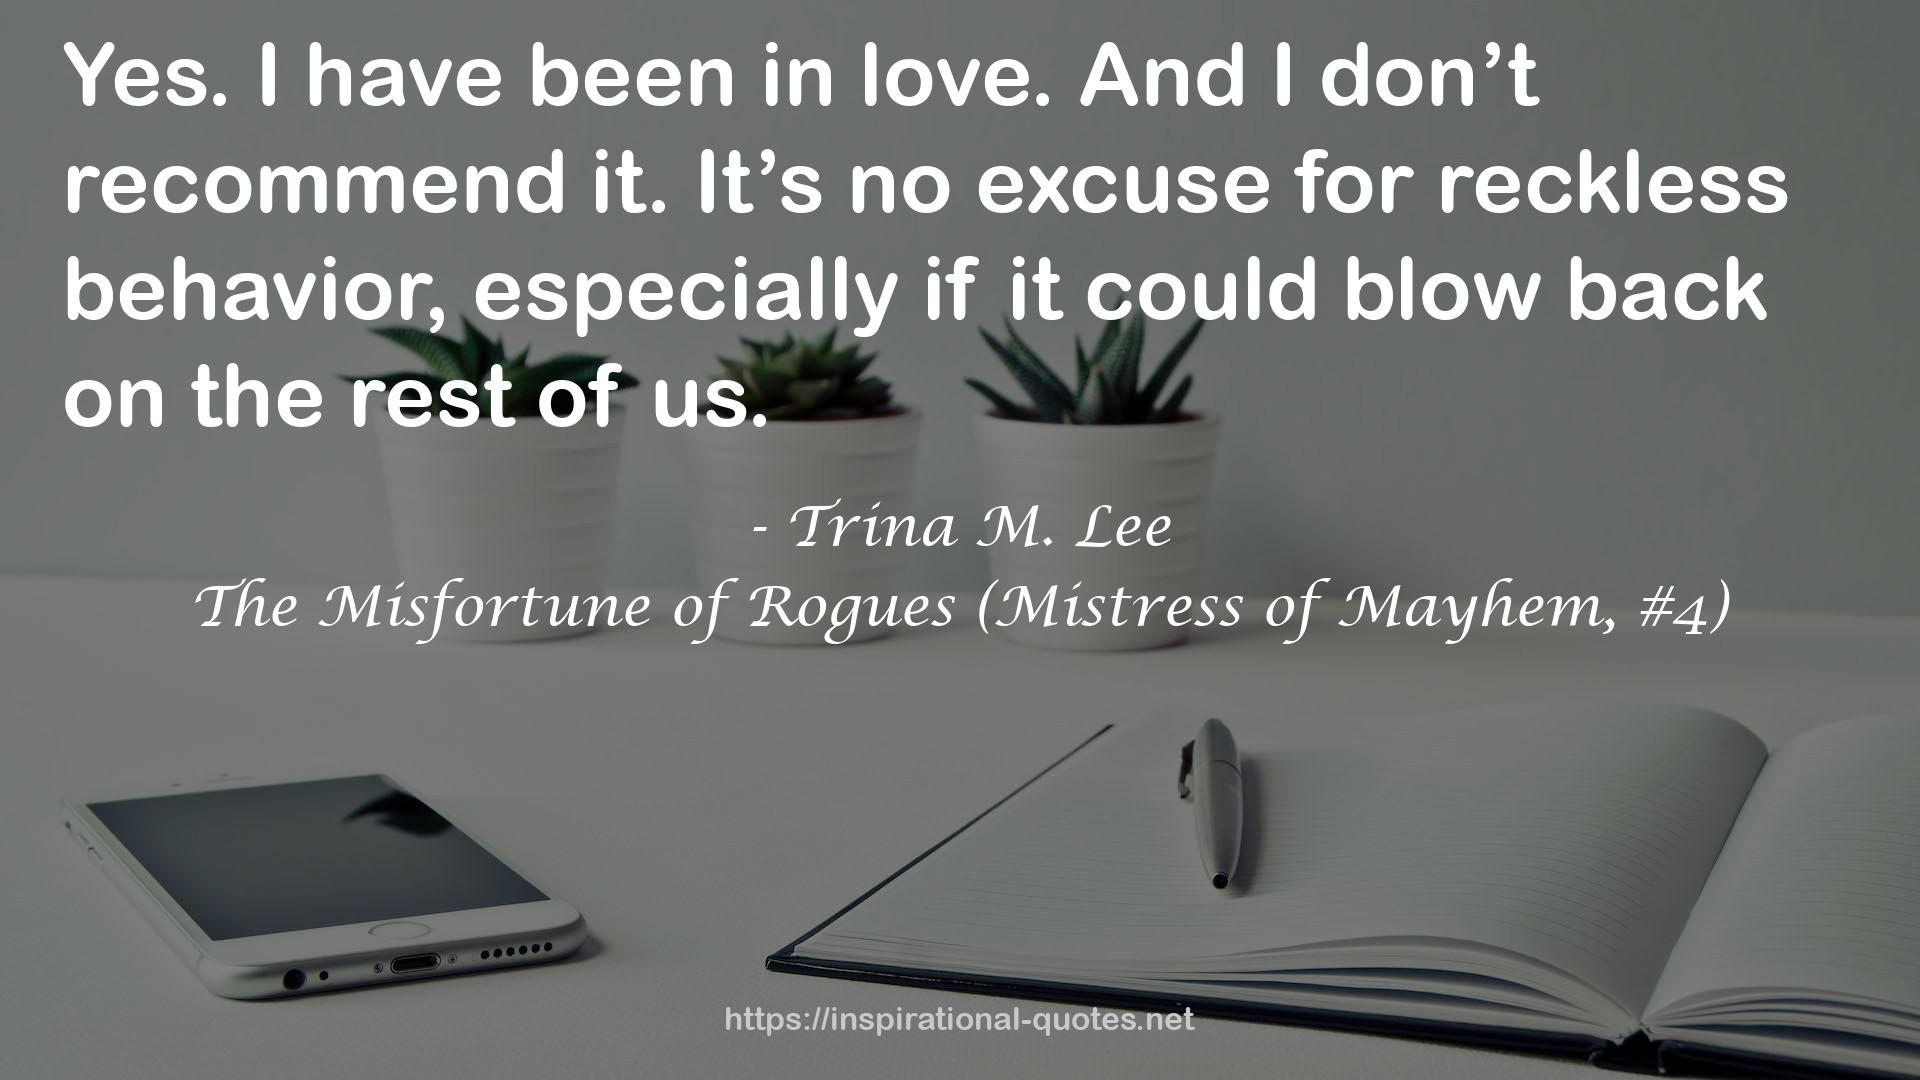 The Misfortune of Rogues (Mistress of Mayhem, #4) QUOTES